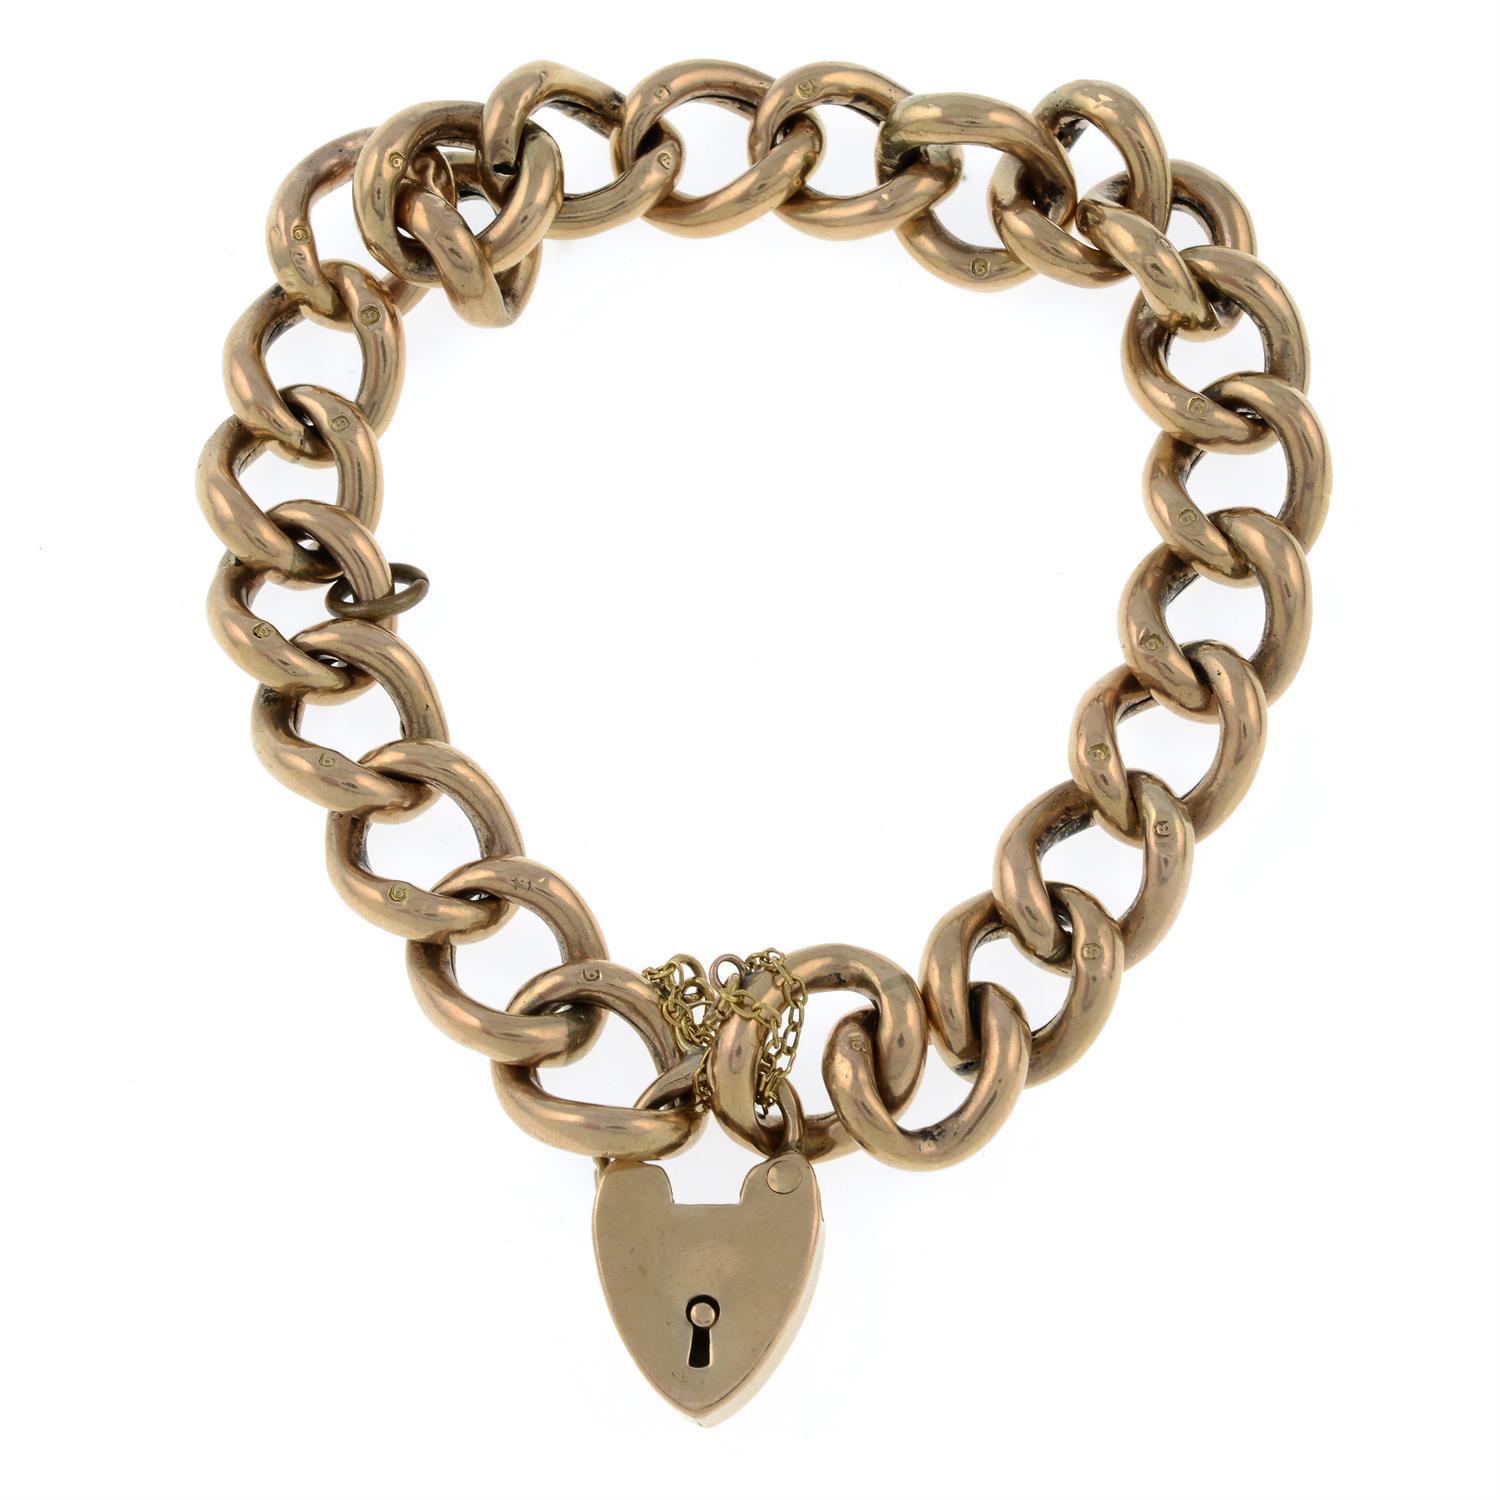 A 9ct gold bracelet with heart-lock clasp.